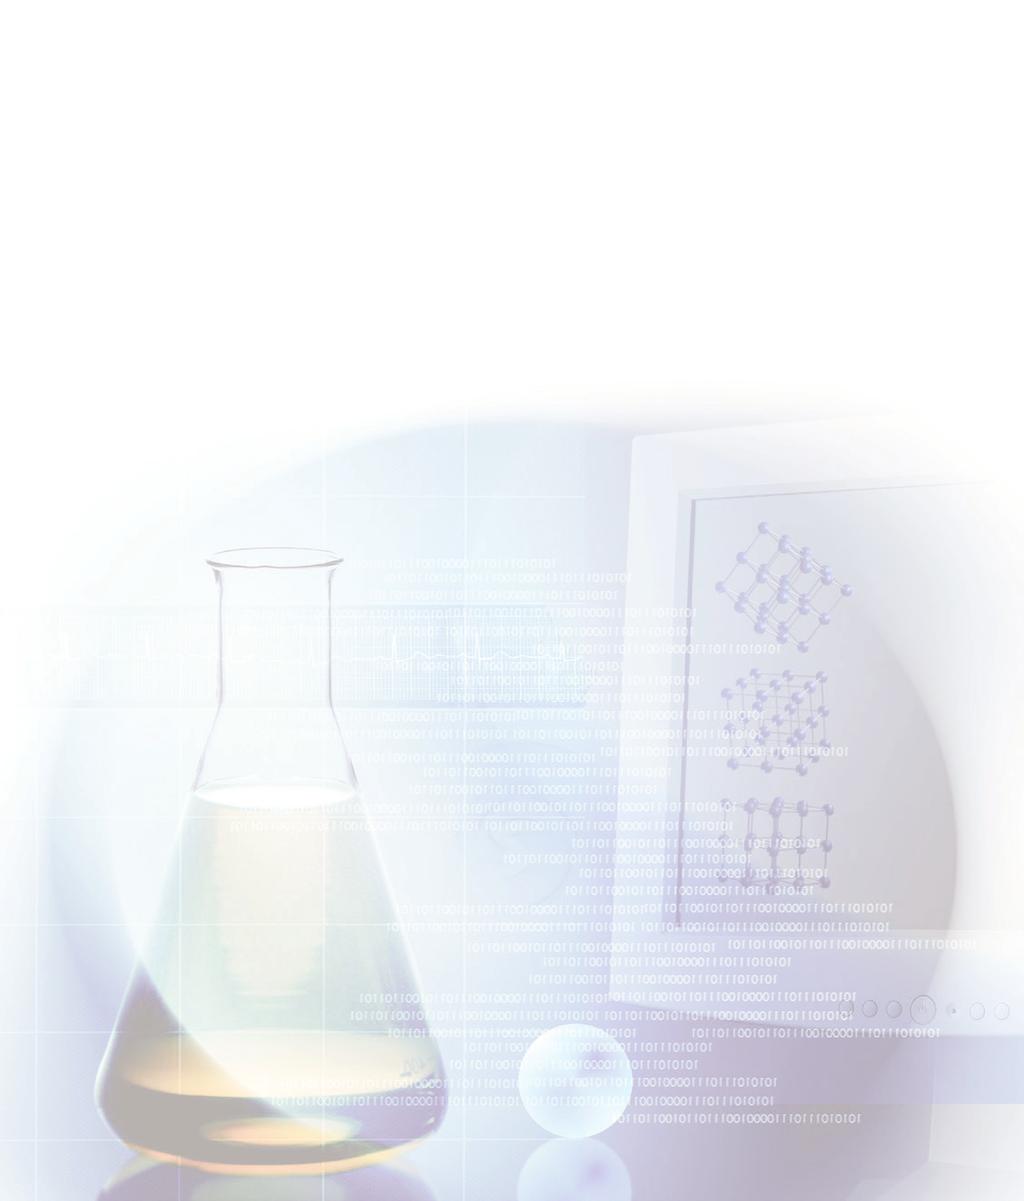 The QualiChem Advantage QualiChem provides customized laboratory support services to help you maintain your fluids, investigate solutions to complex issues and increase product performance Securing